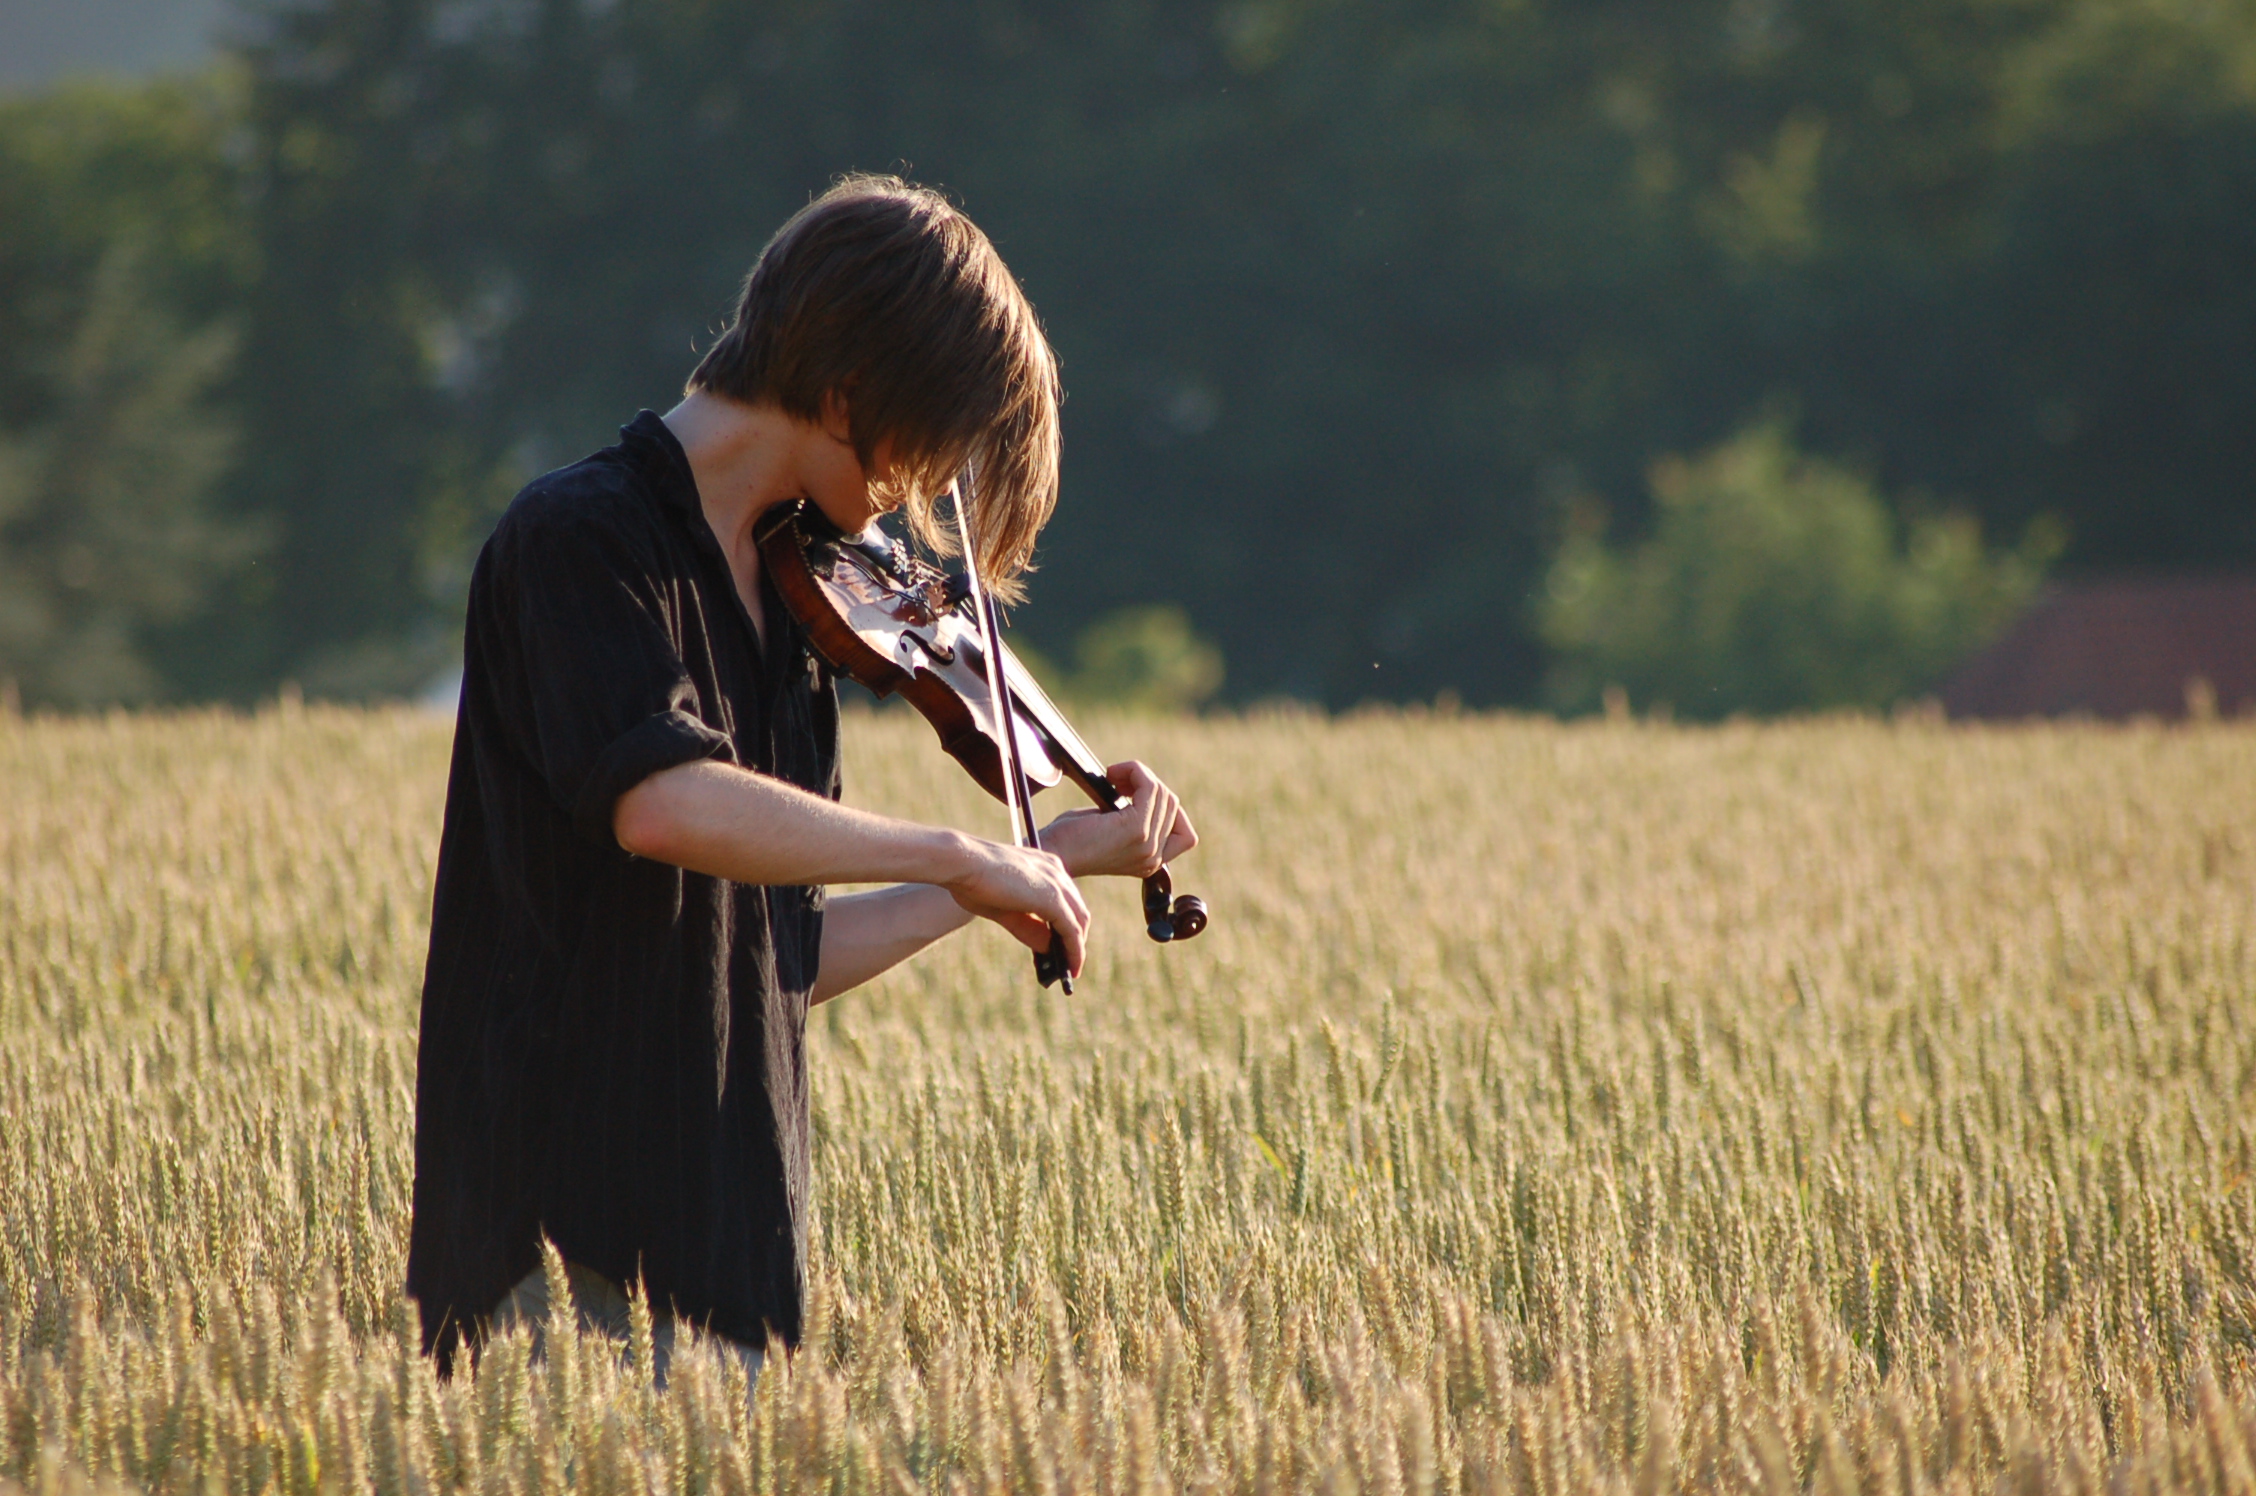 Me standing in a grain field, playing the violin.